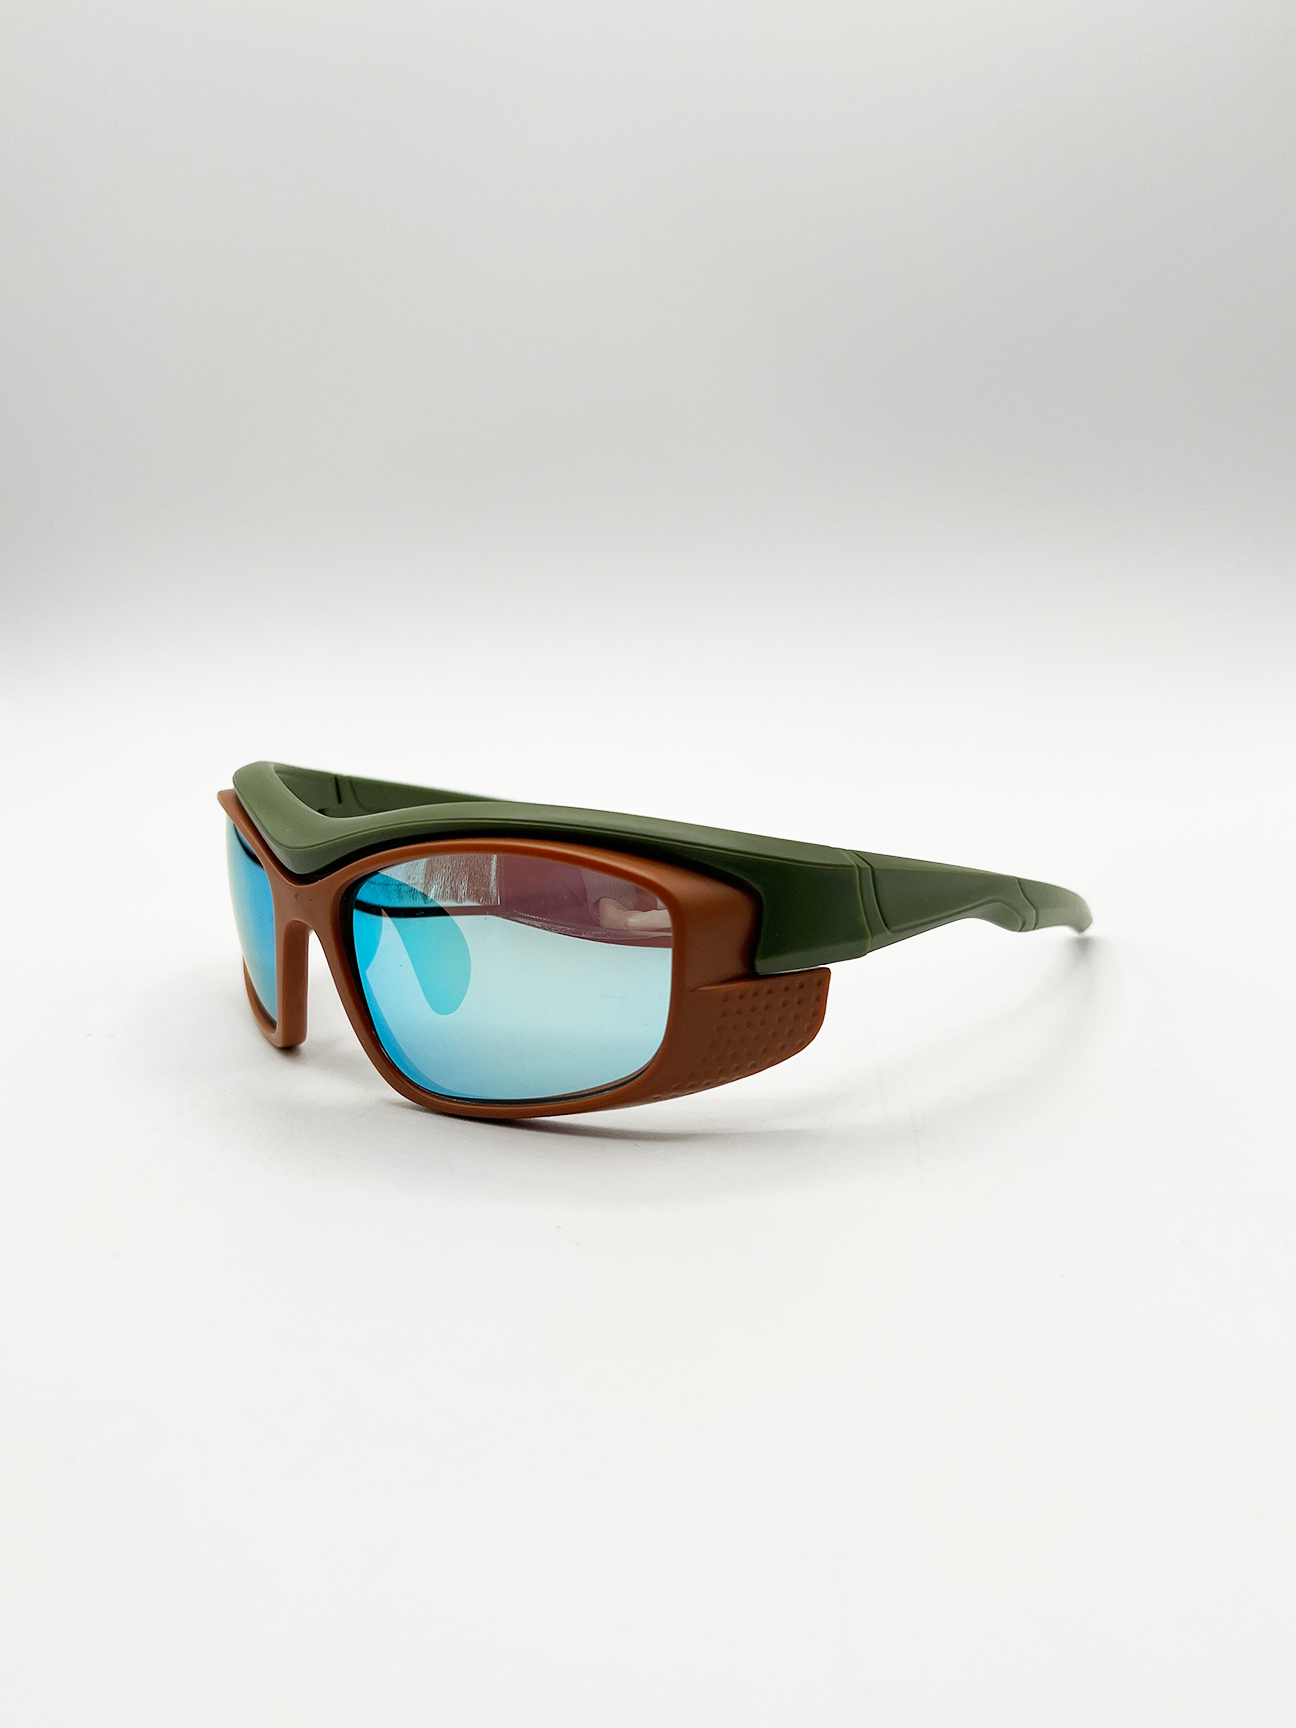 Cycling Style Glasses in Multi with Mirrored lens